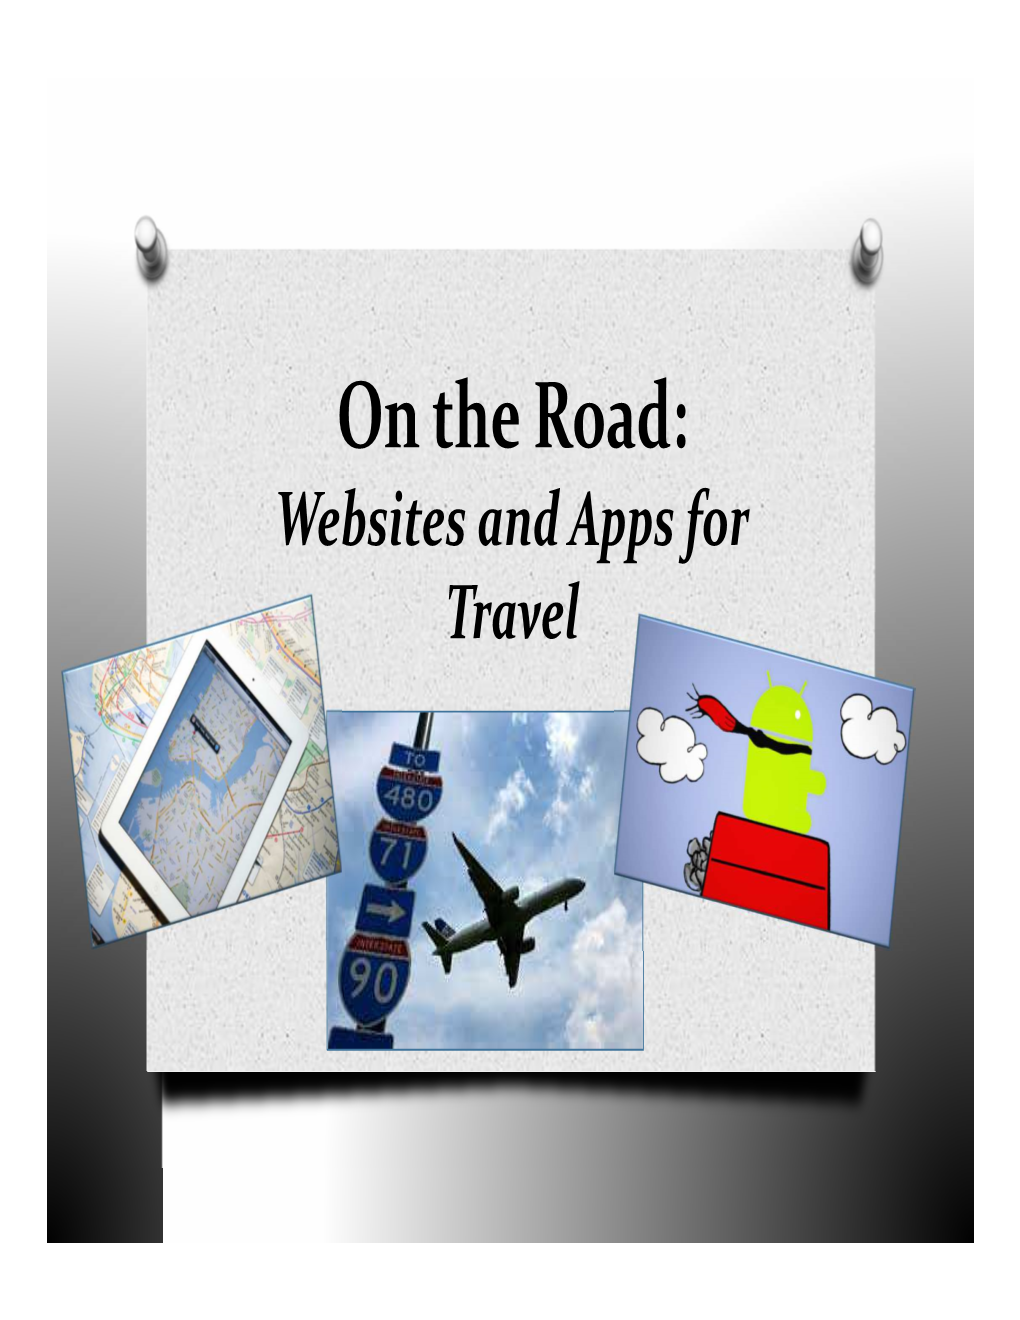 On the Road: Websites and Apps for Travel Loading the Right Apps